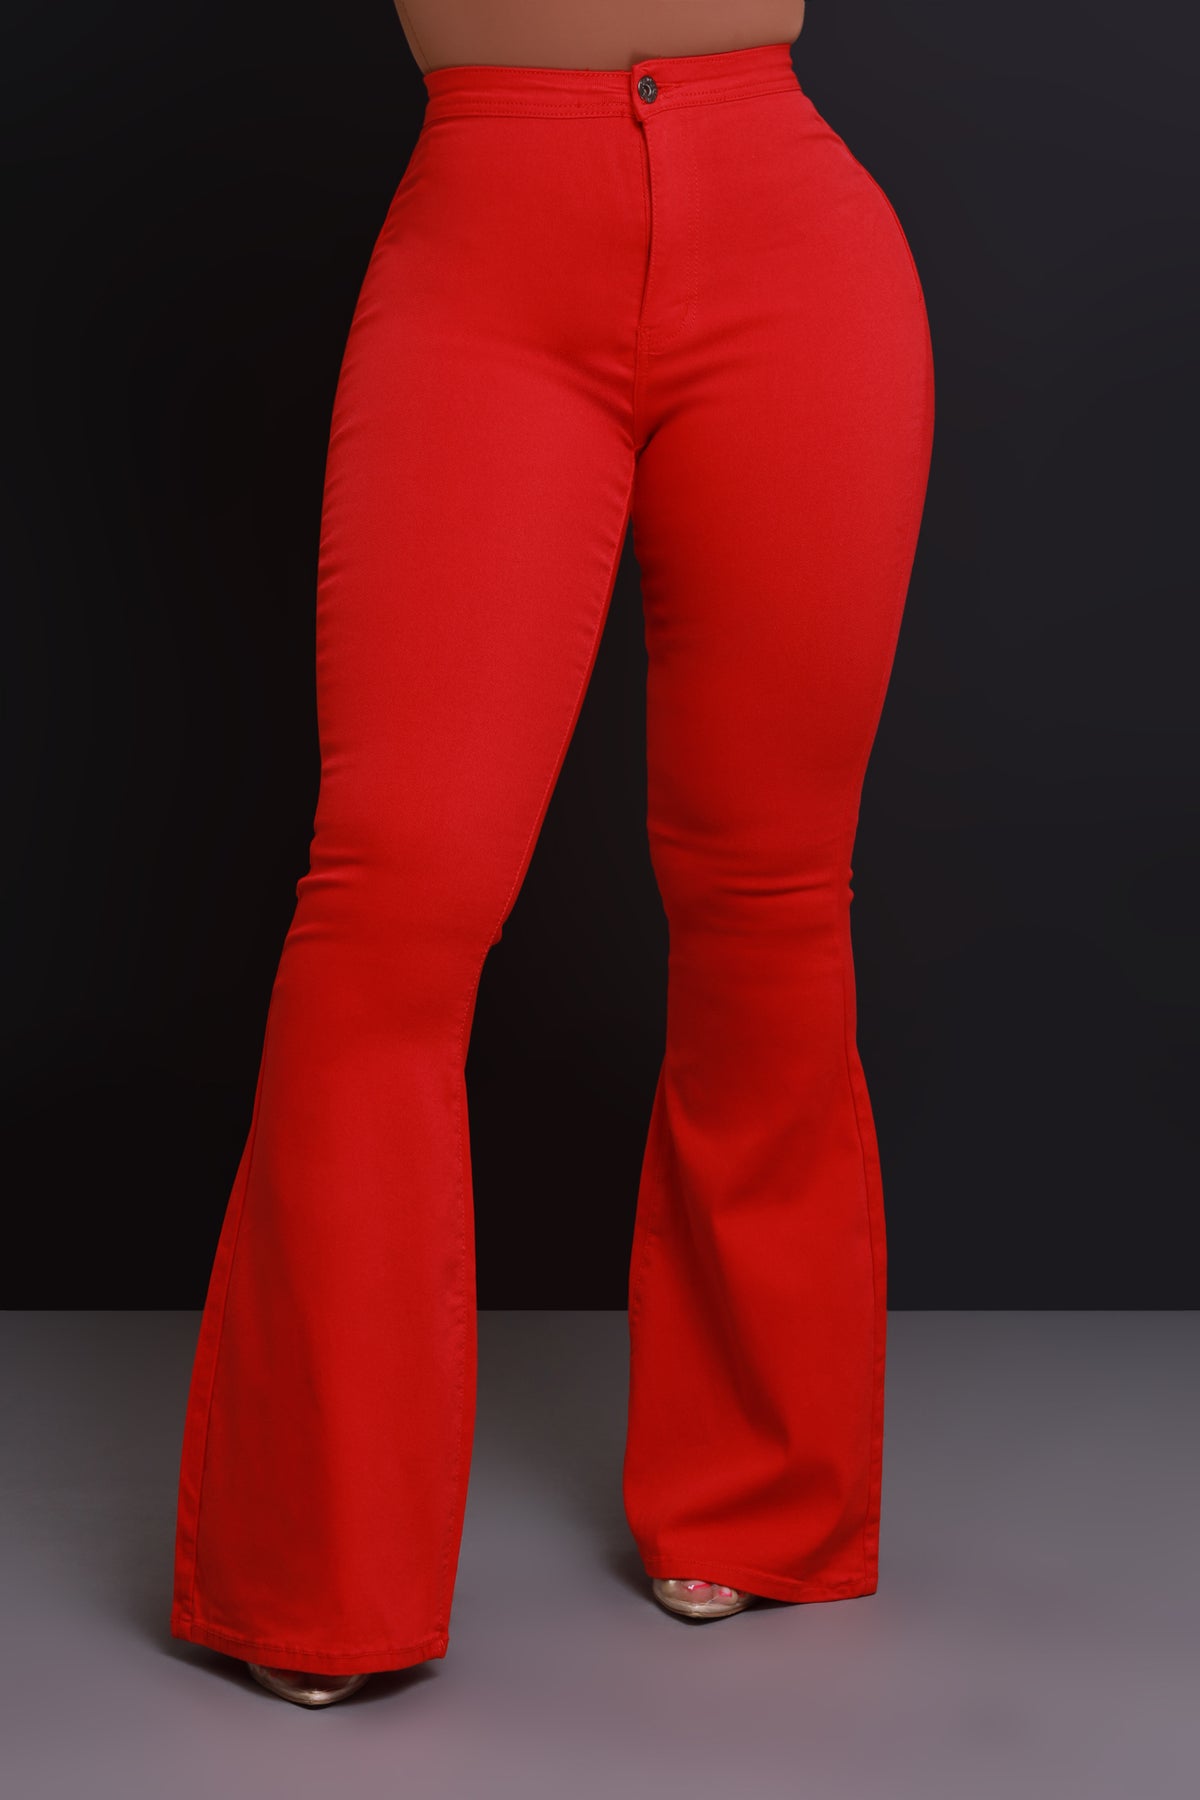 
              Super Swank High Rise Flare Stretchy Jeans - Red - Swank A Posh
            